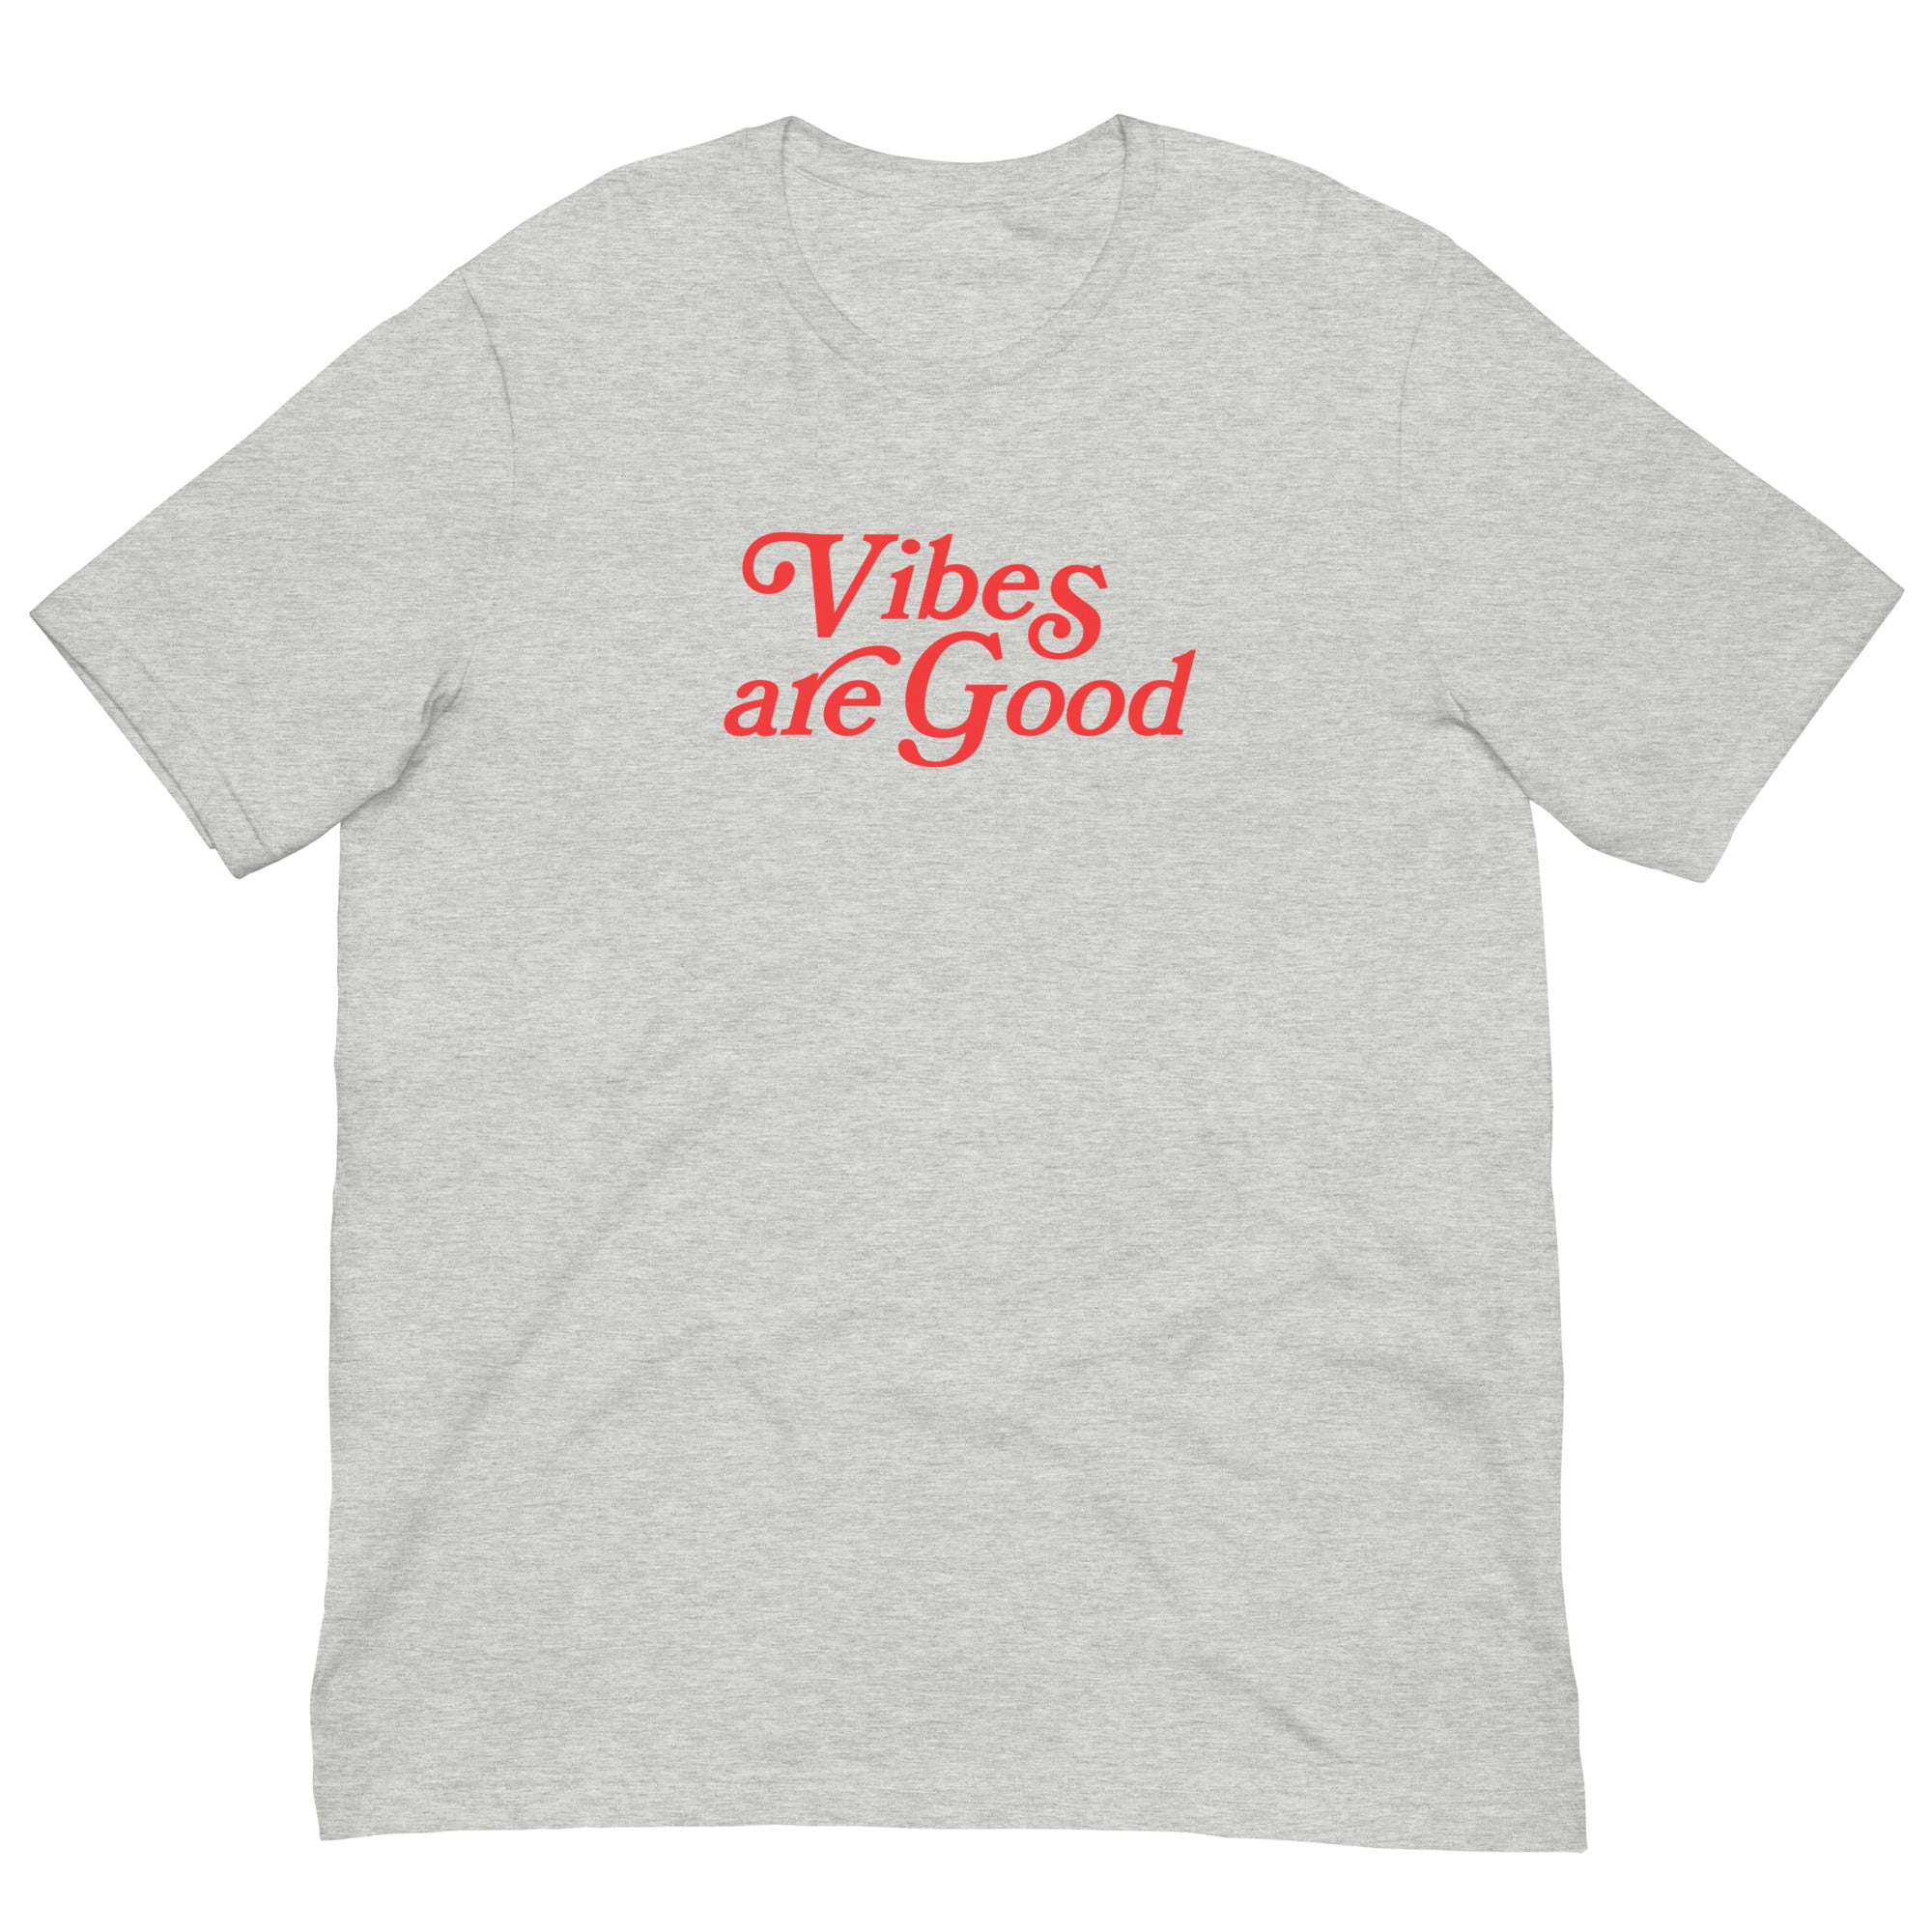 Vibes are Good Tee